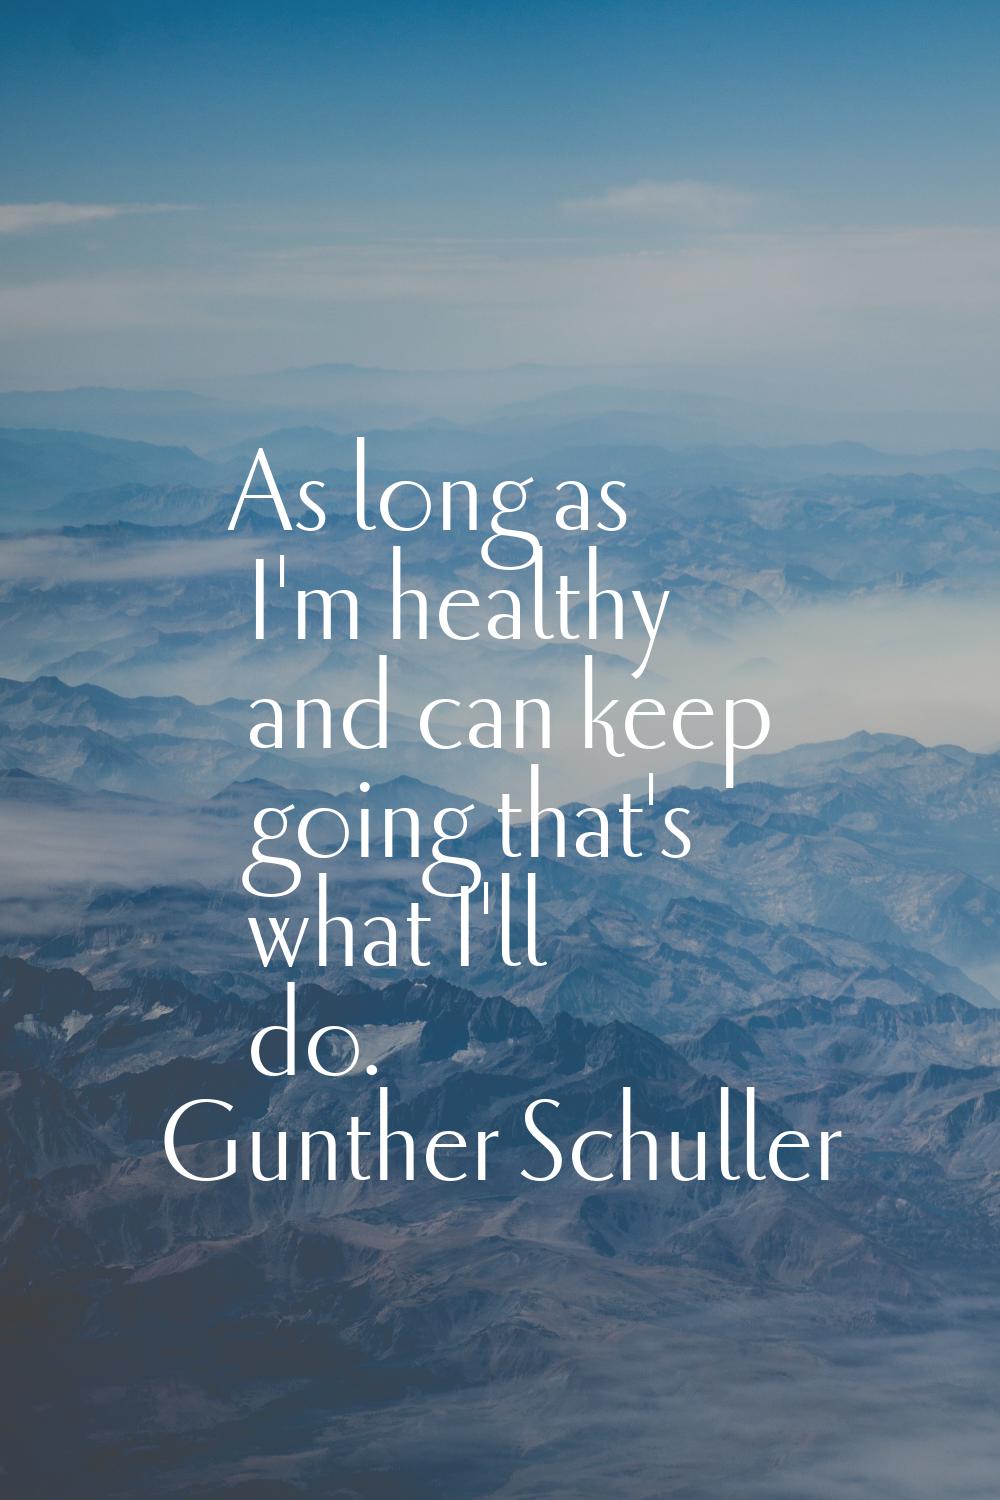 As long as I'm healthy and can keep going that's what I'll do.